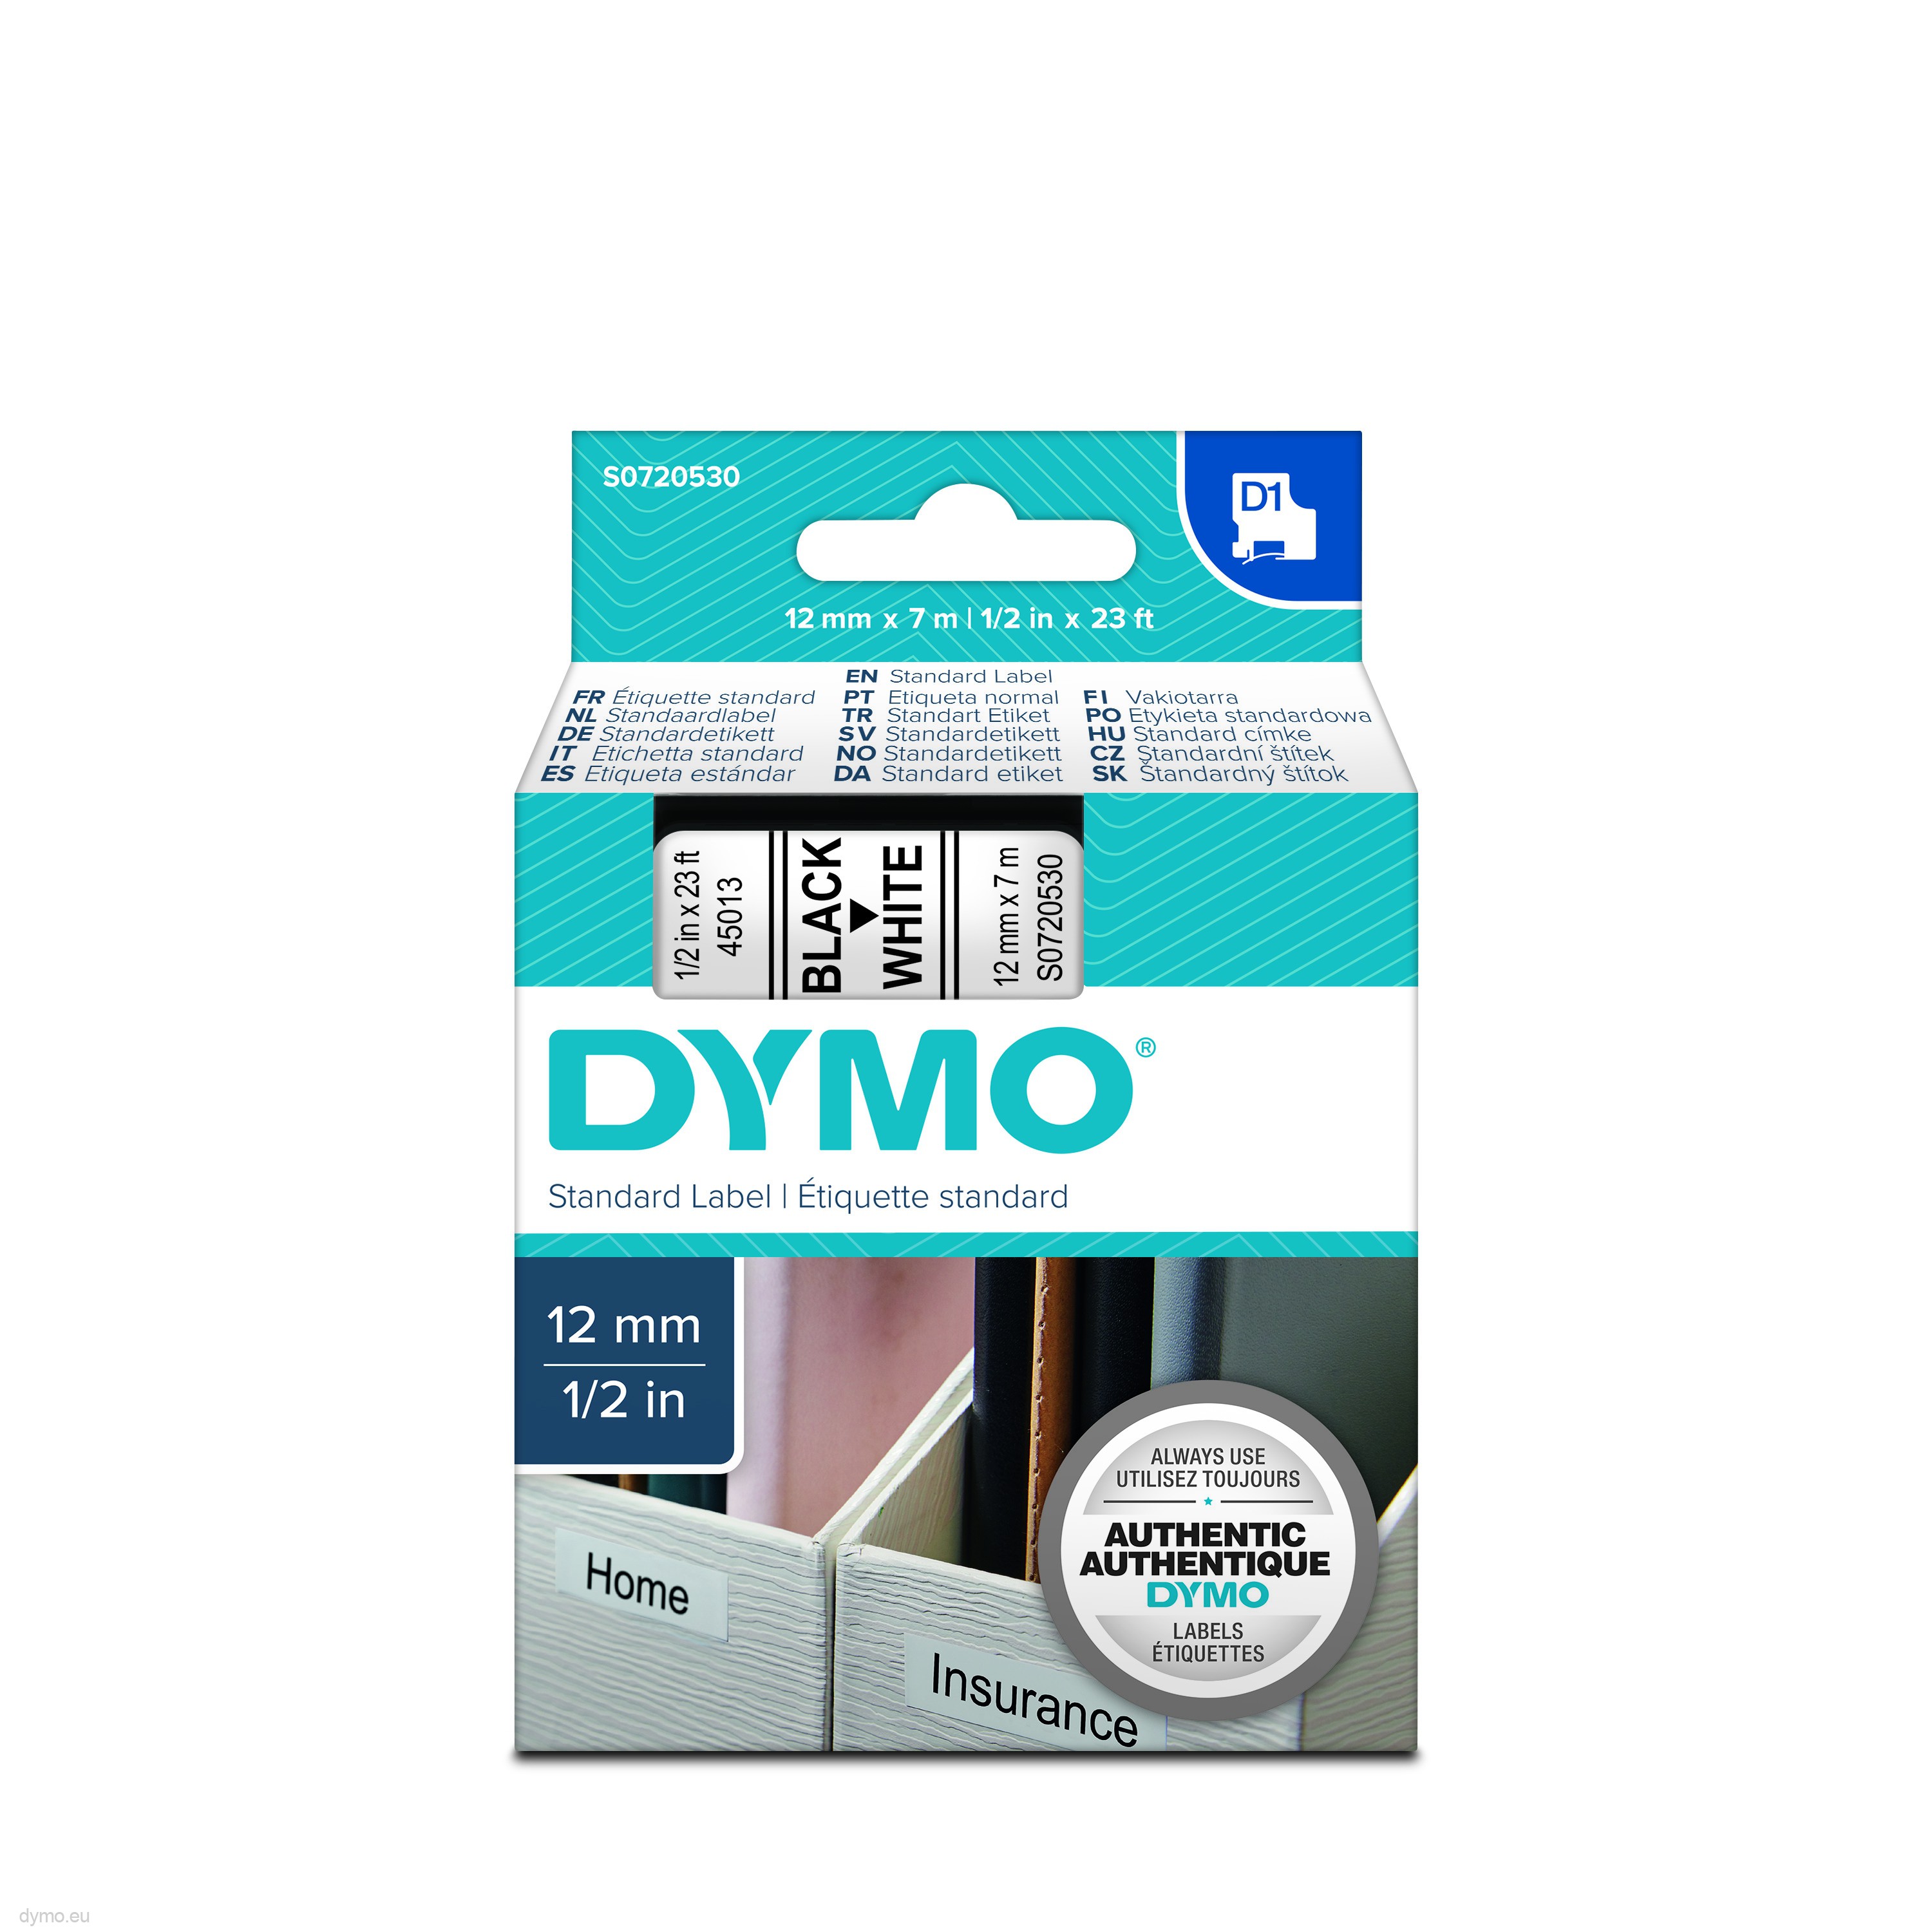 5 PK Compatible for Dymo D1 Label Tape 45013 12mm x 7m Black On White S0720530 